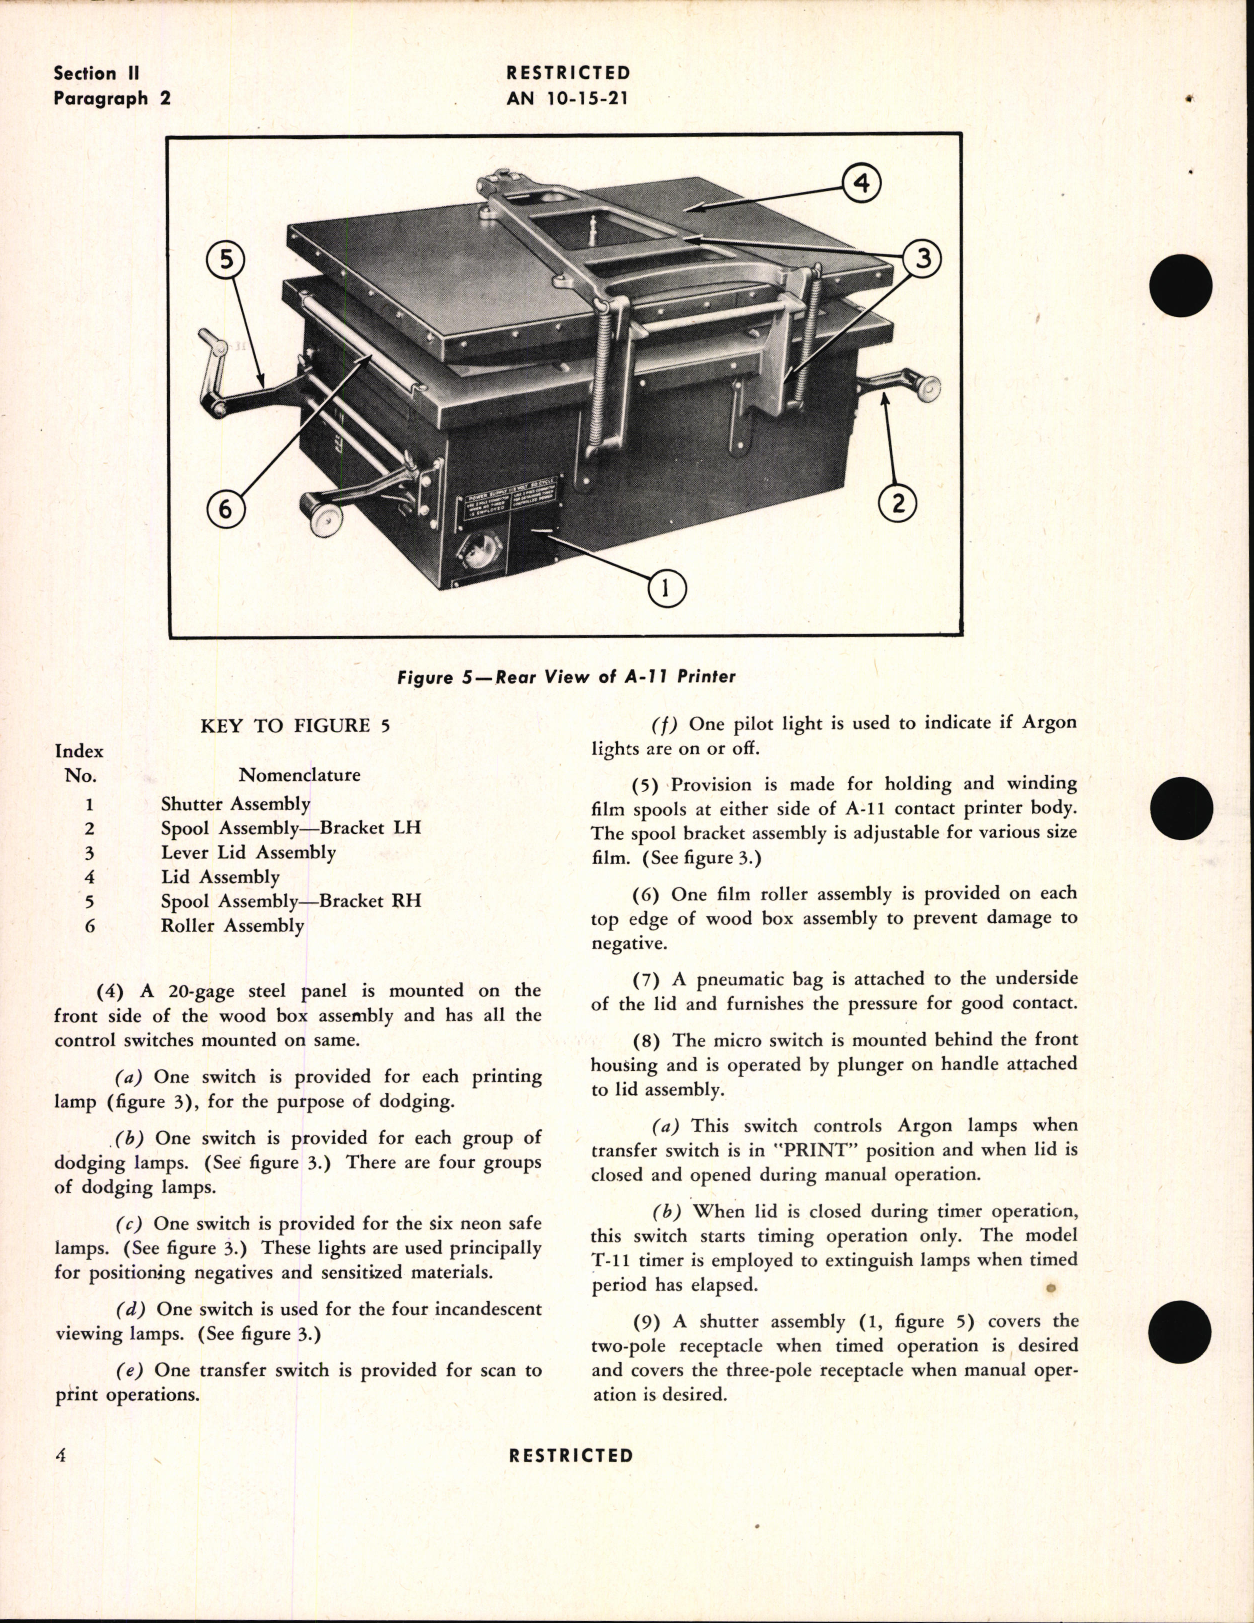 Sample page 8 from AirCorps Library document: Handbook of Instructions with Parts Catalog for Type A-11 Contact Printer